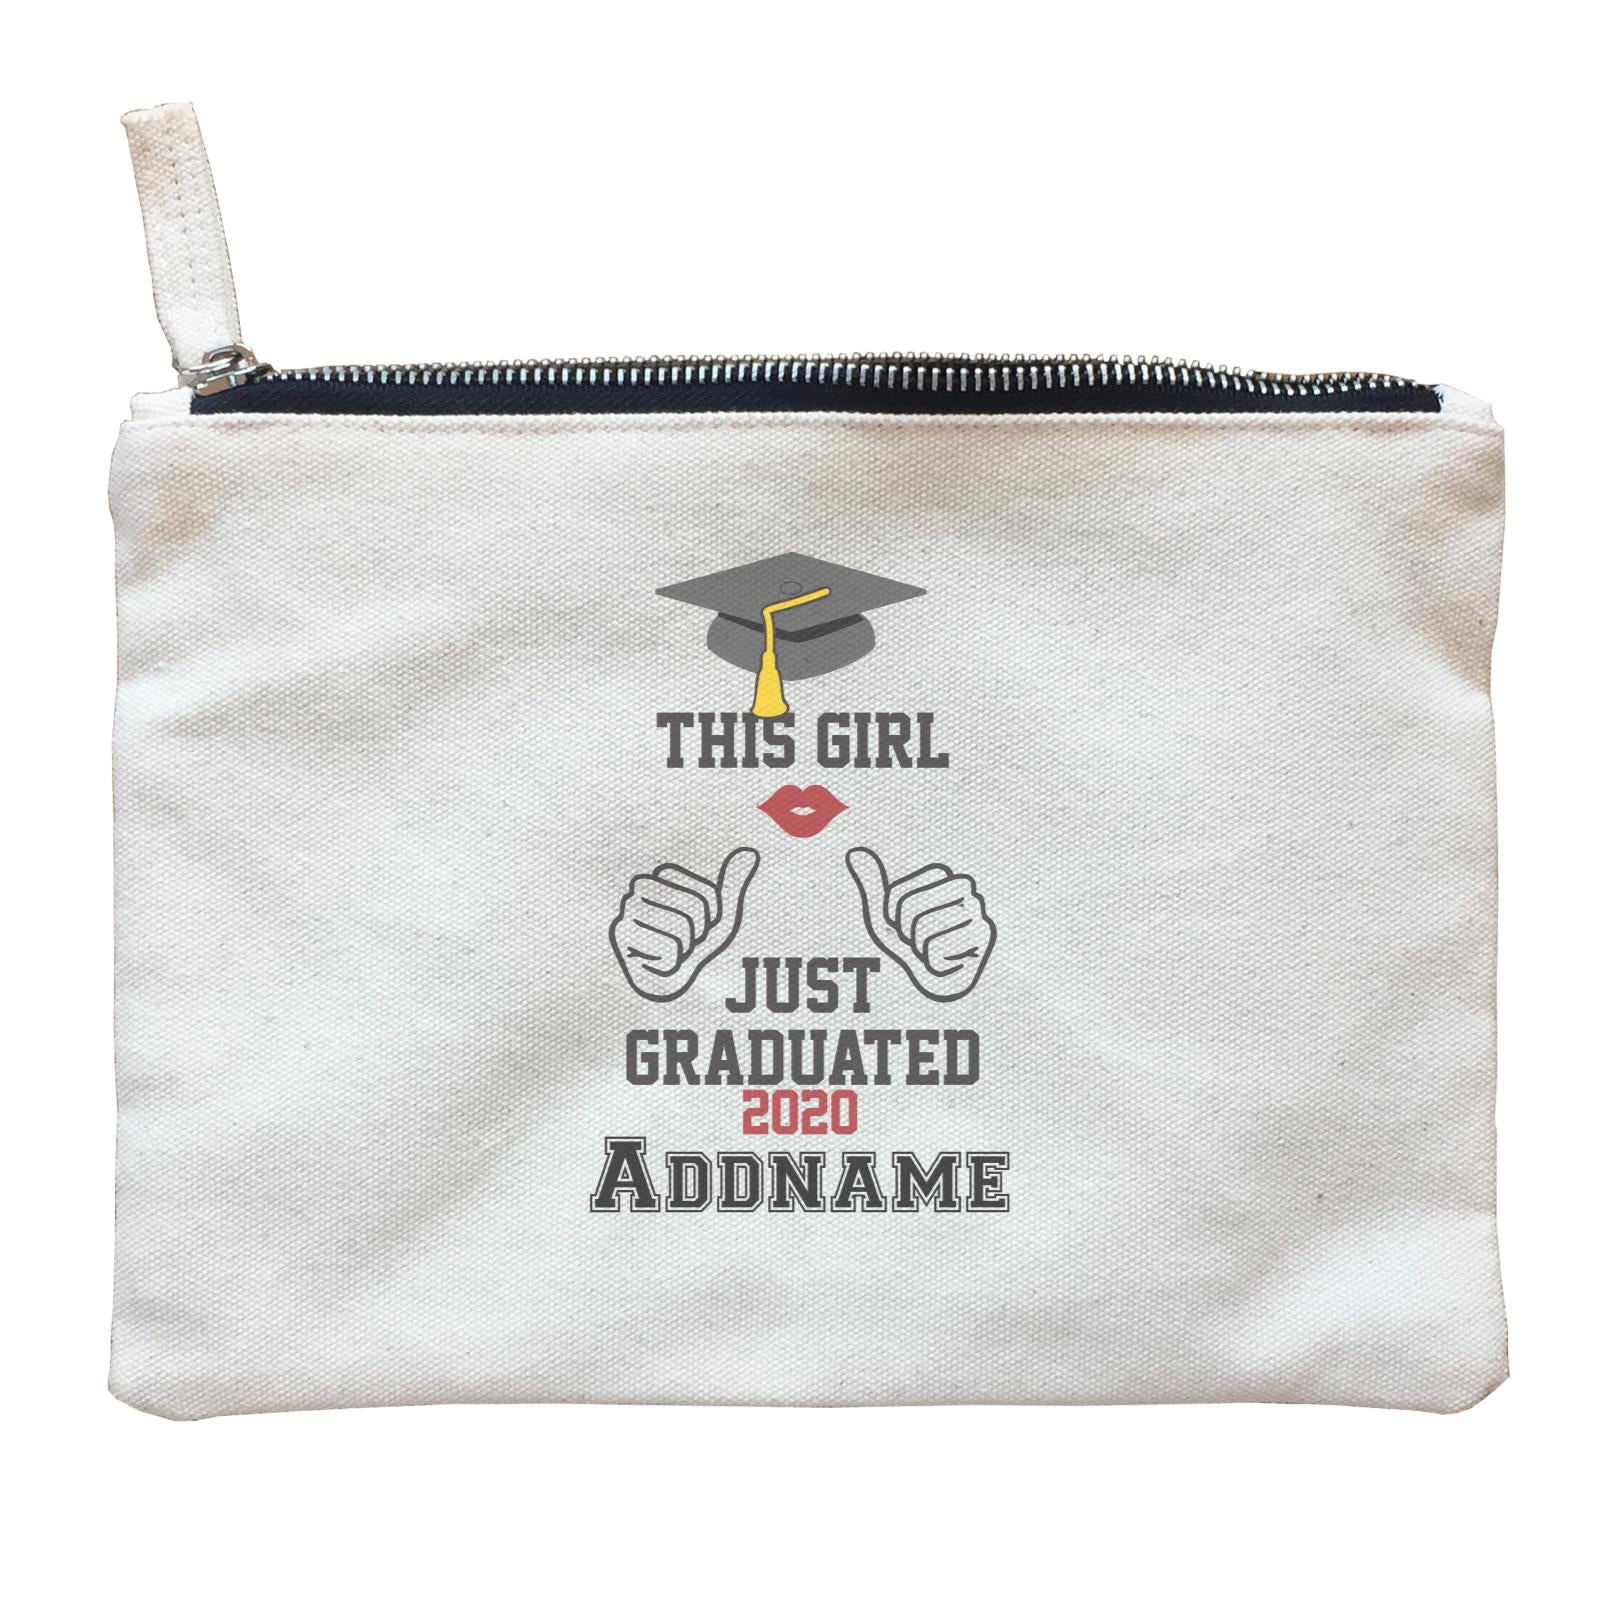 Graduation Series This Girl Just Graduated Zipper Pouch